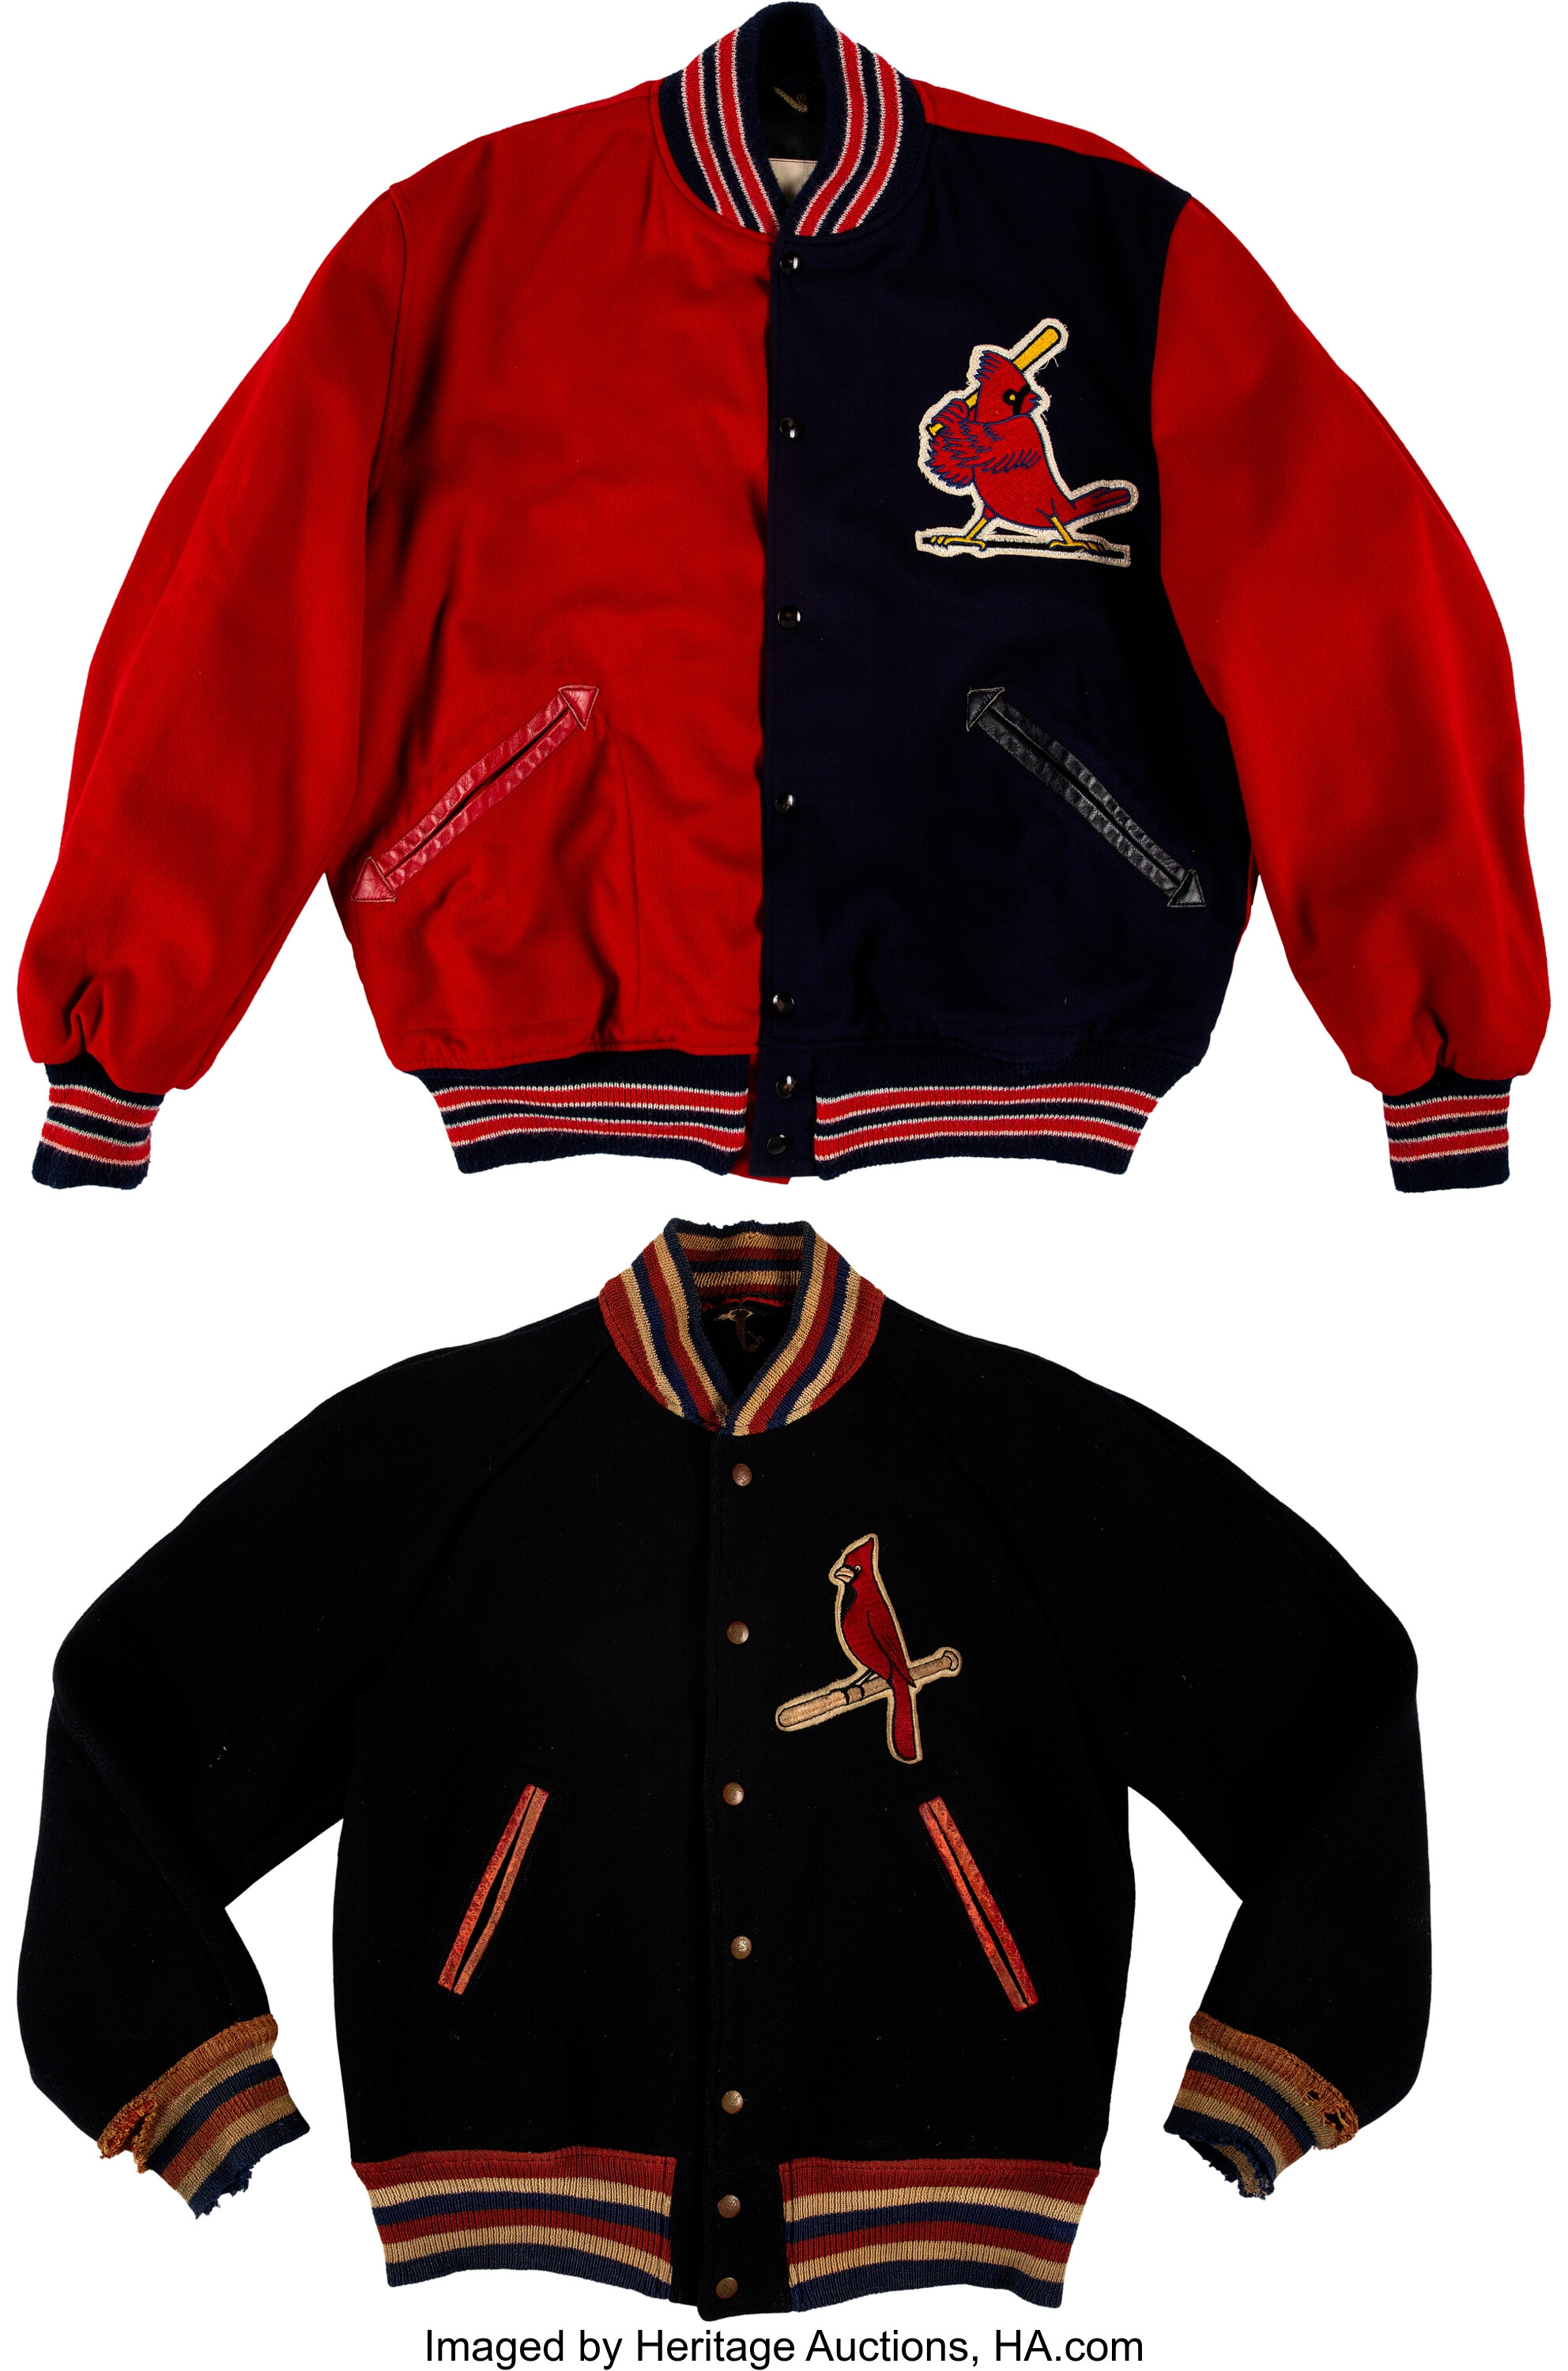 1934 St. Louis Cardinals Jacket Cooperstown Collection by Mirage